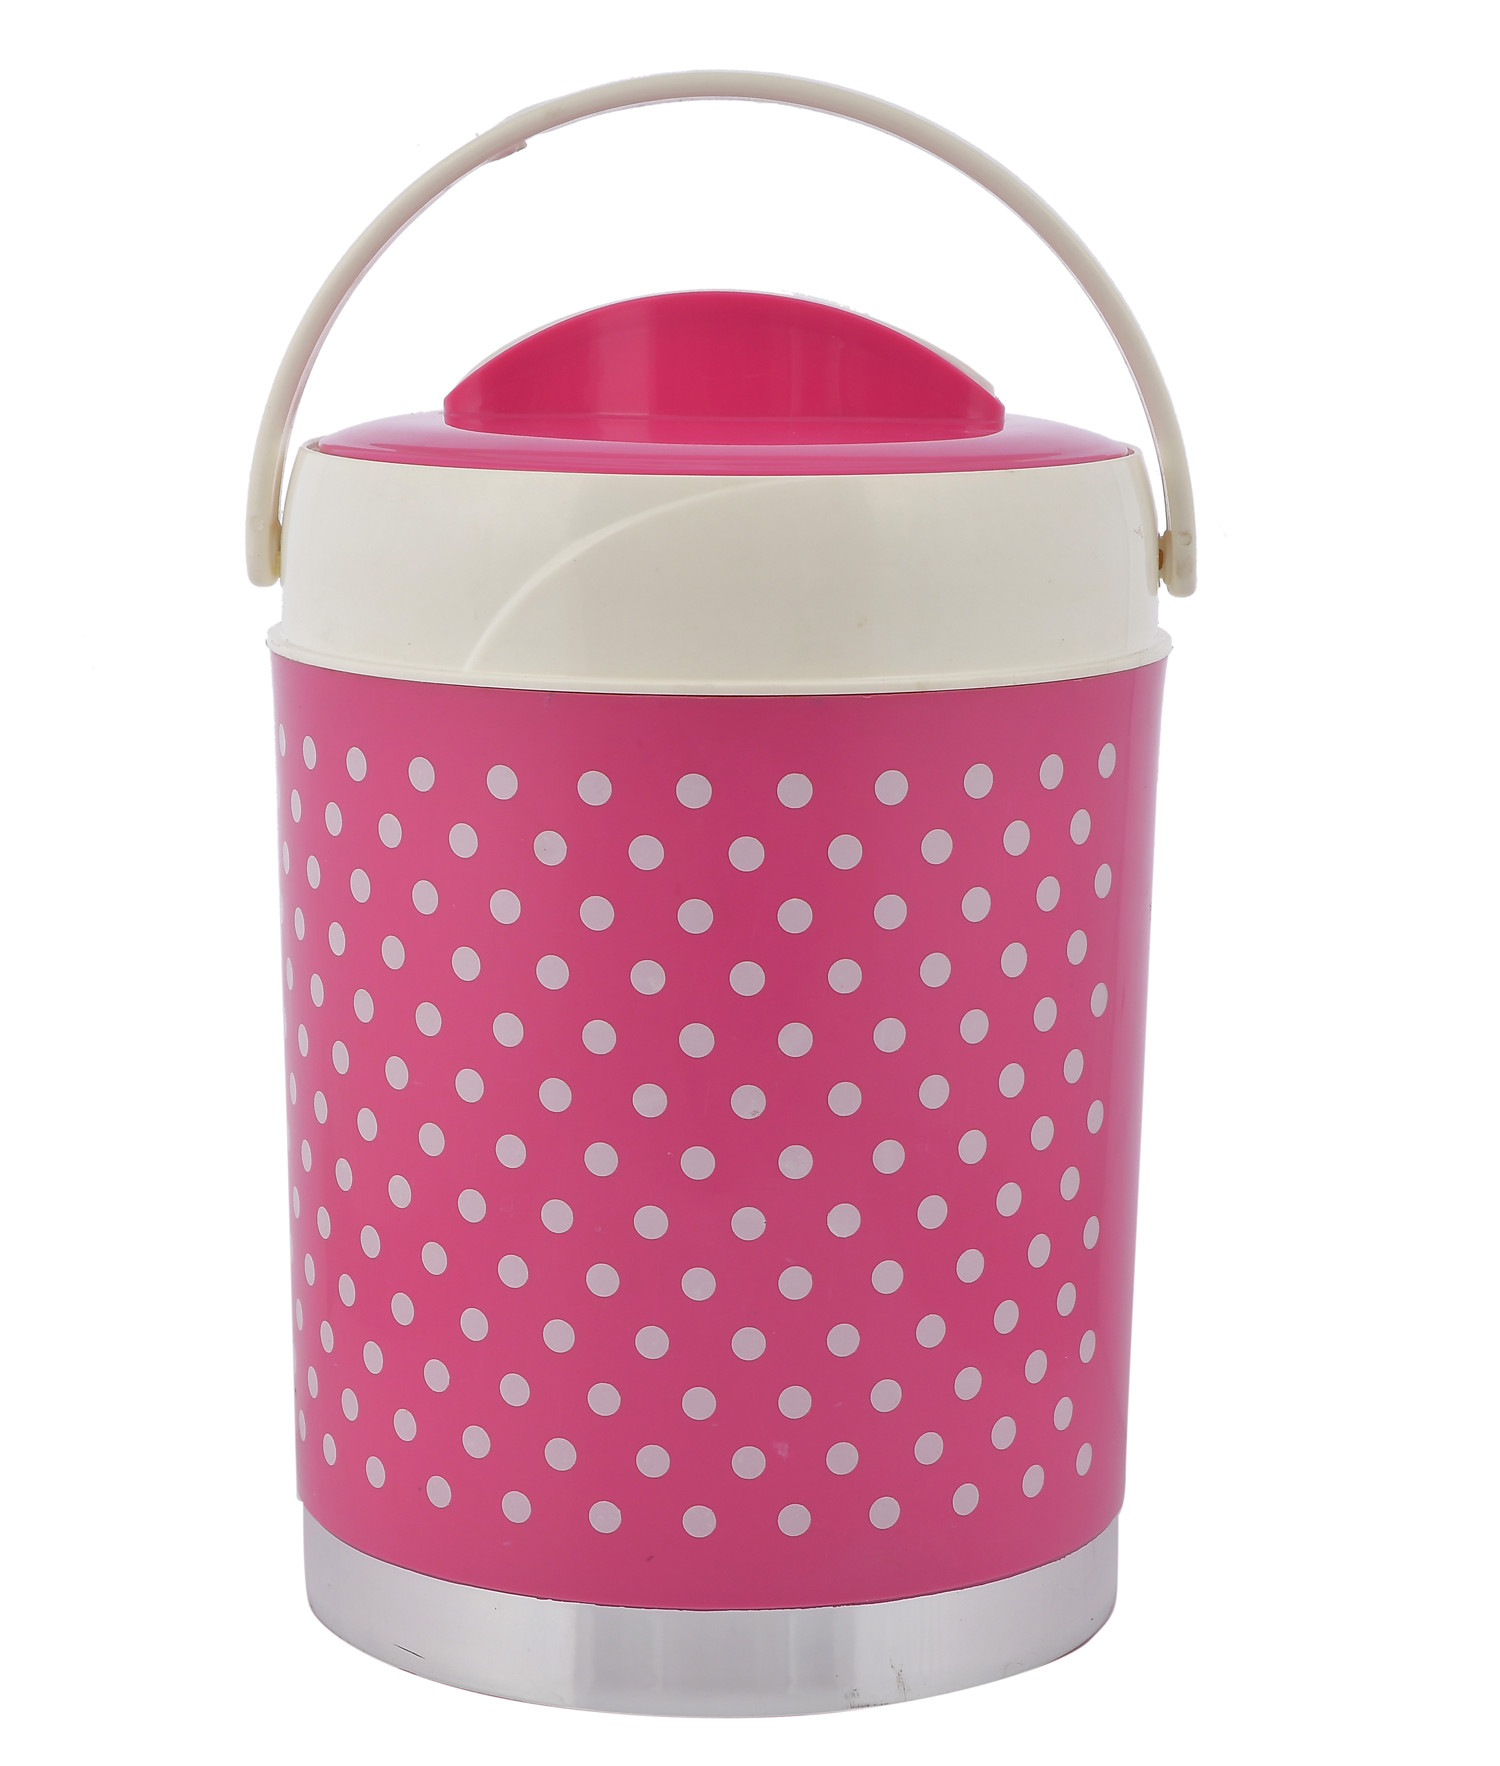 Kuber Industries Dot Printed Insulated Water Jug, Camper For Travel, Picnic, Home, Office With Handle, 3.5 Ltrs (Pink)-HS42KUBMART25197